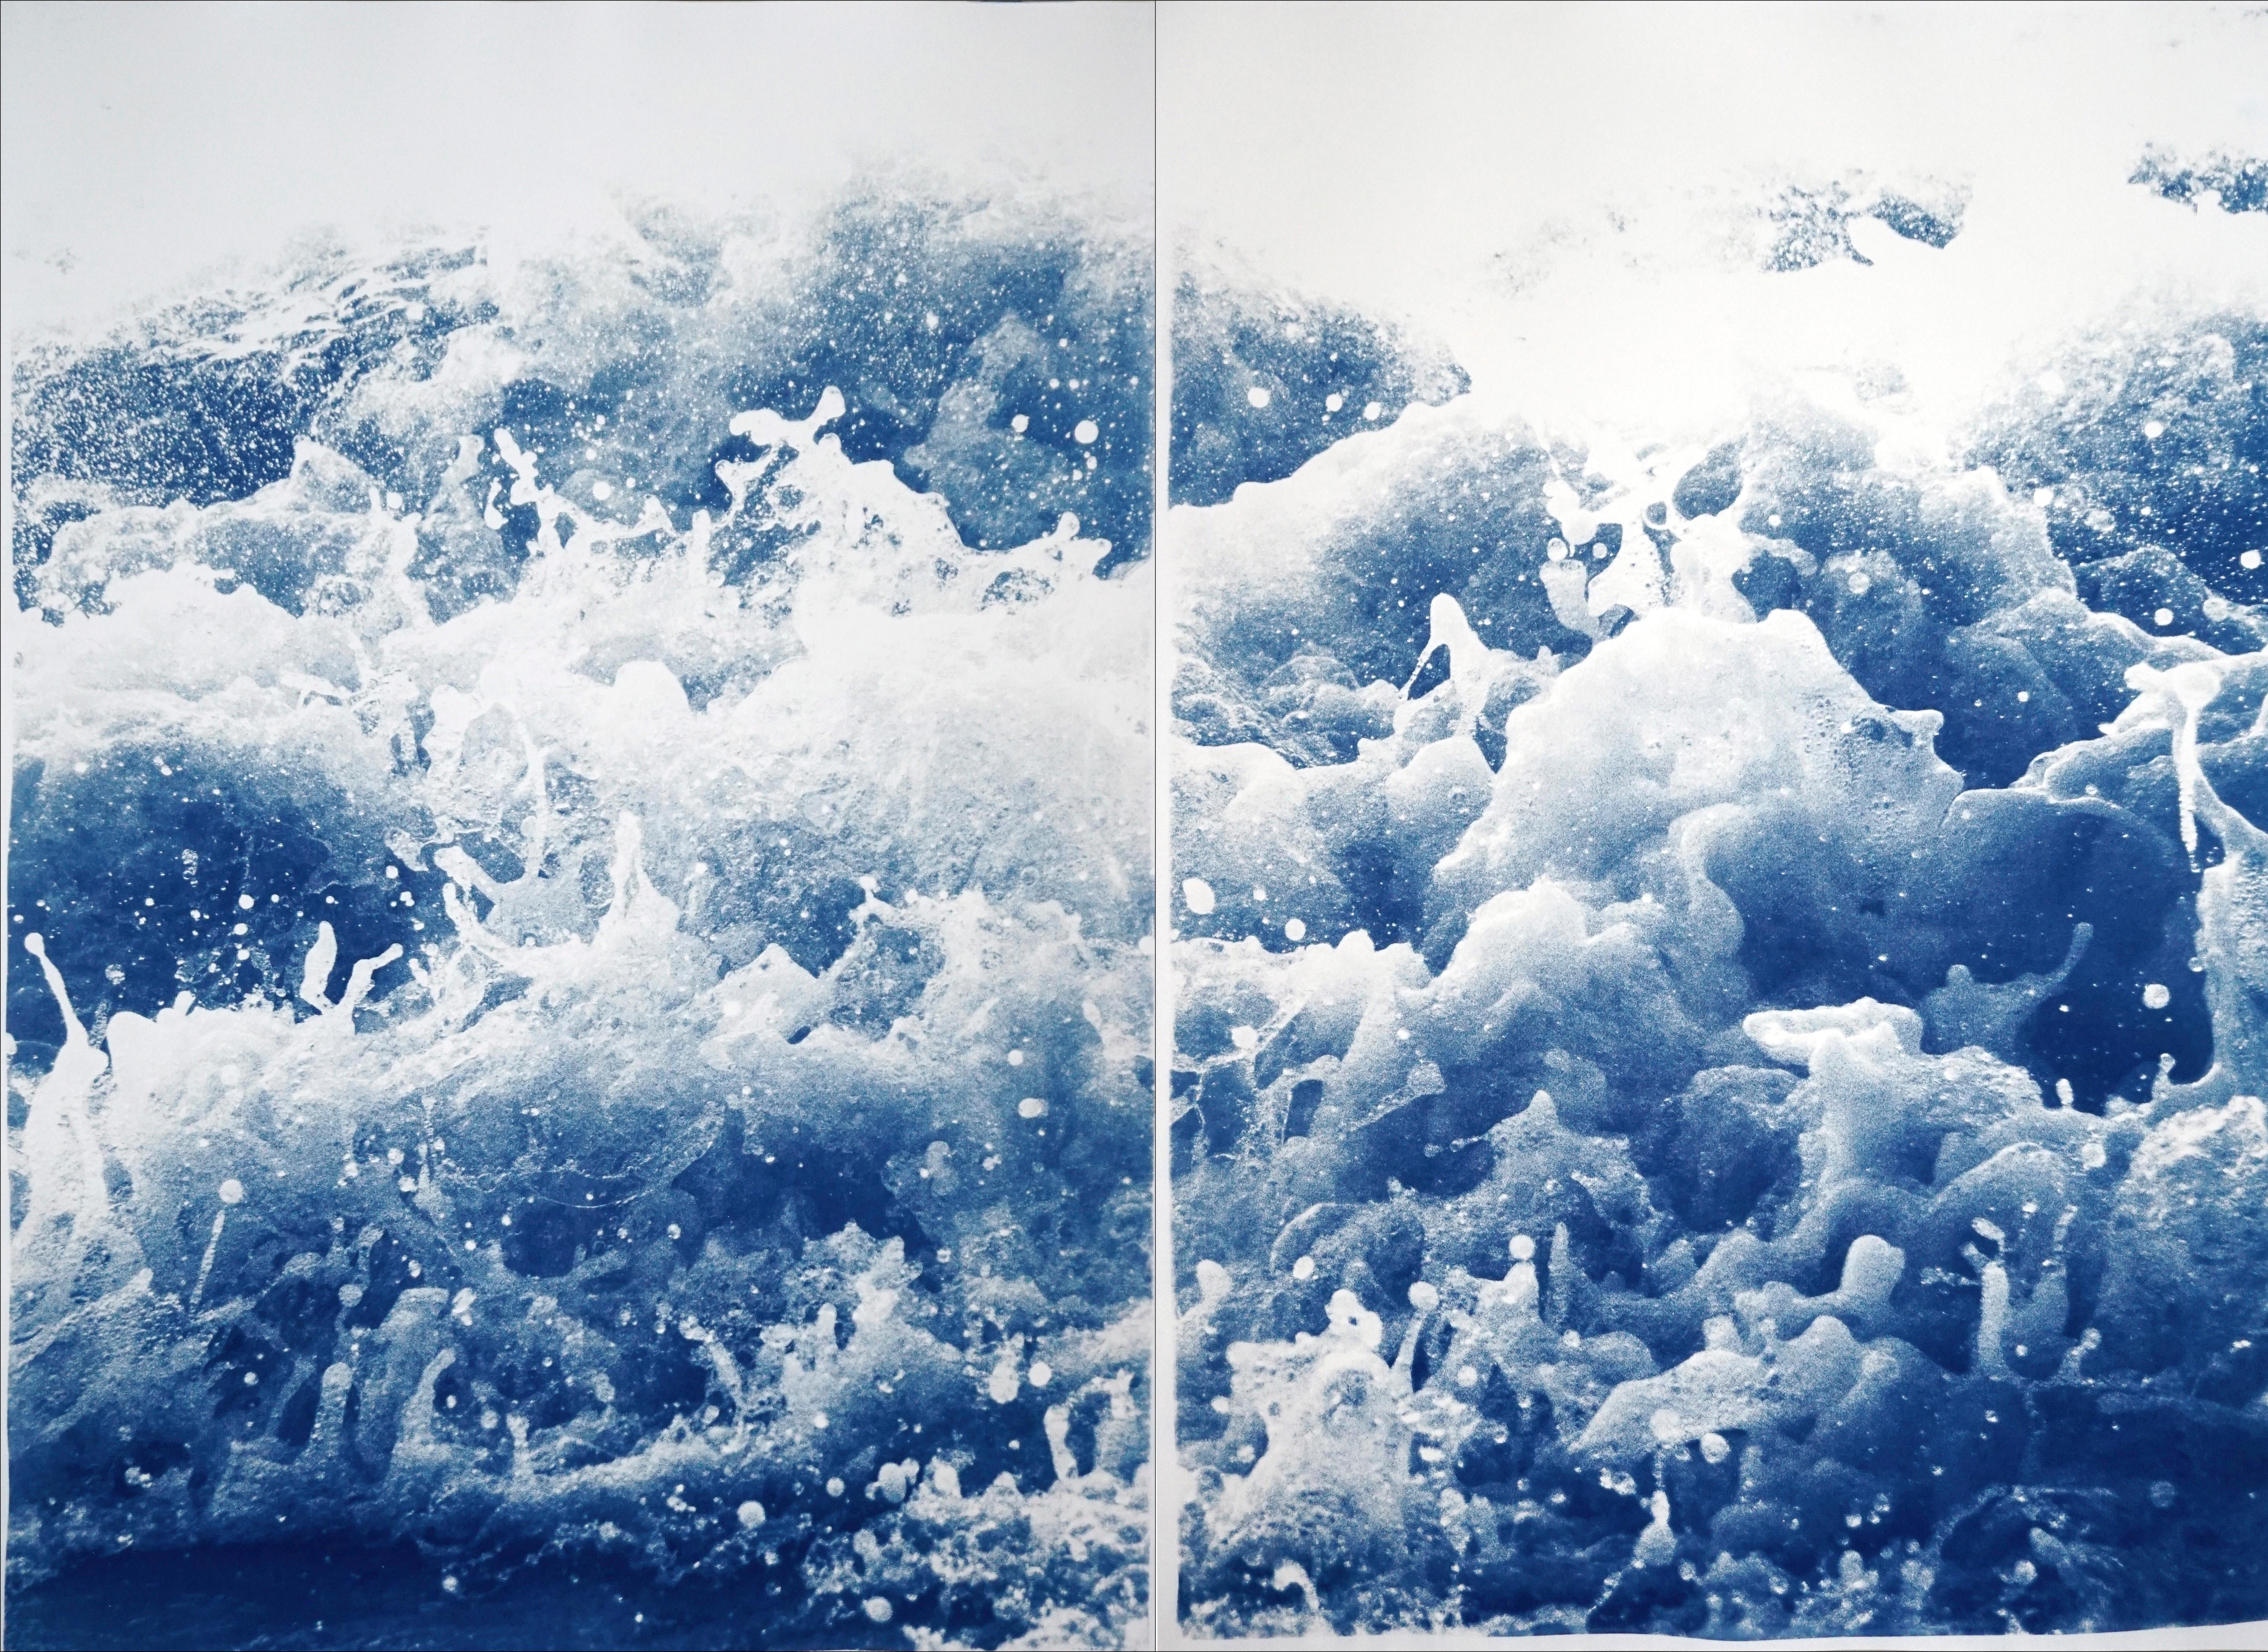 Kind of Cyan Landscape Art - Tempestuous Tidal in Blue, Stormy Seascape Diptych, Cyanotype Print, Duo, Blue